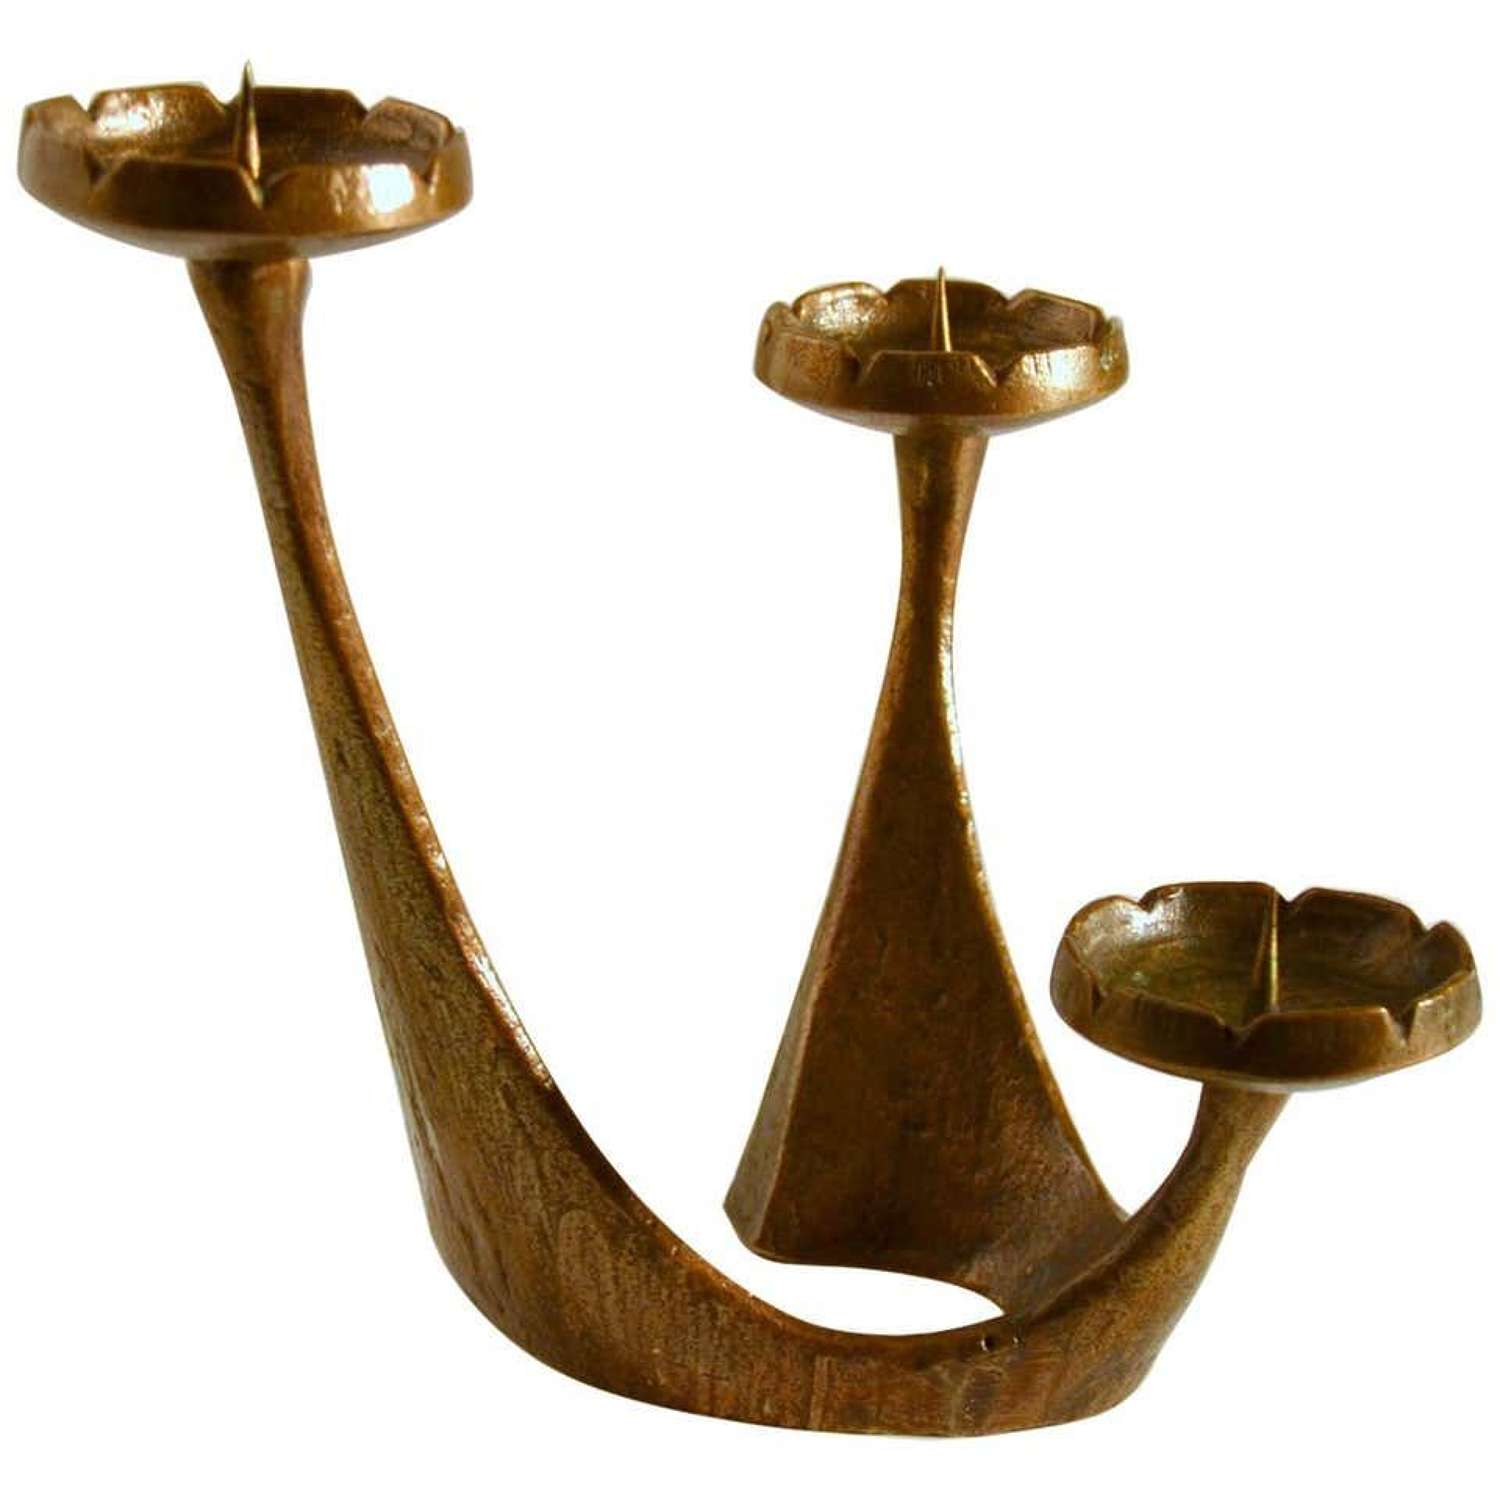 Candelabra Free form shape with Three Arms in Bronze